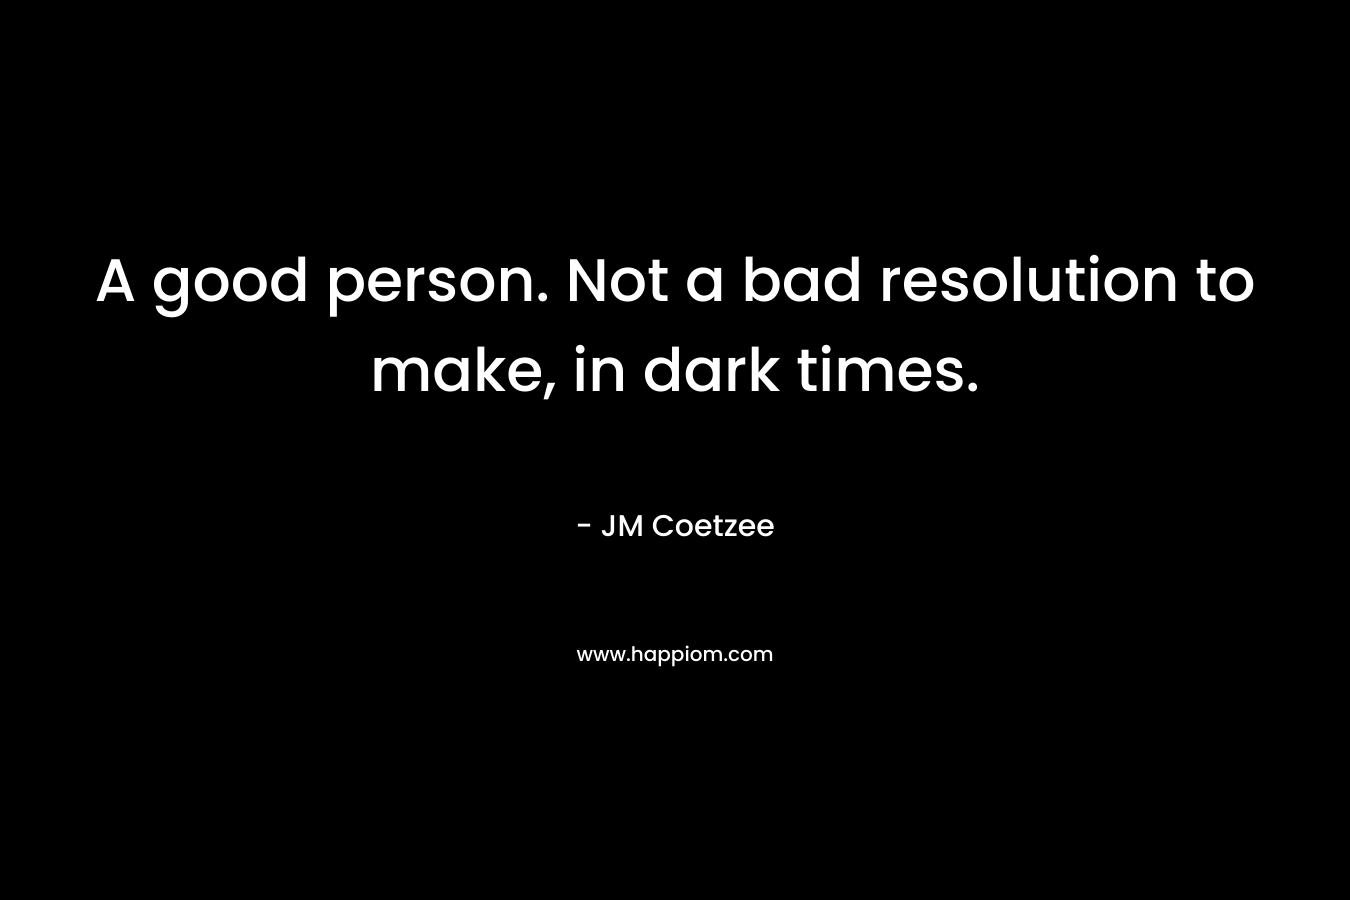 A good person. Not a bad resolution to make, in dark times.